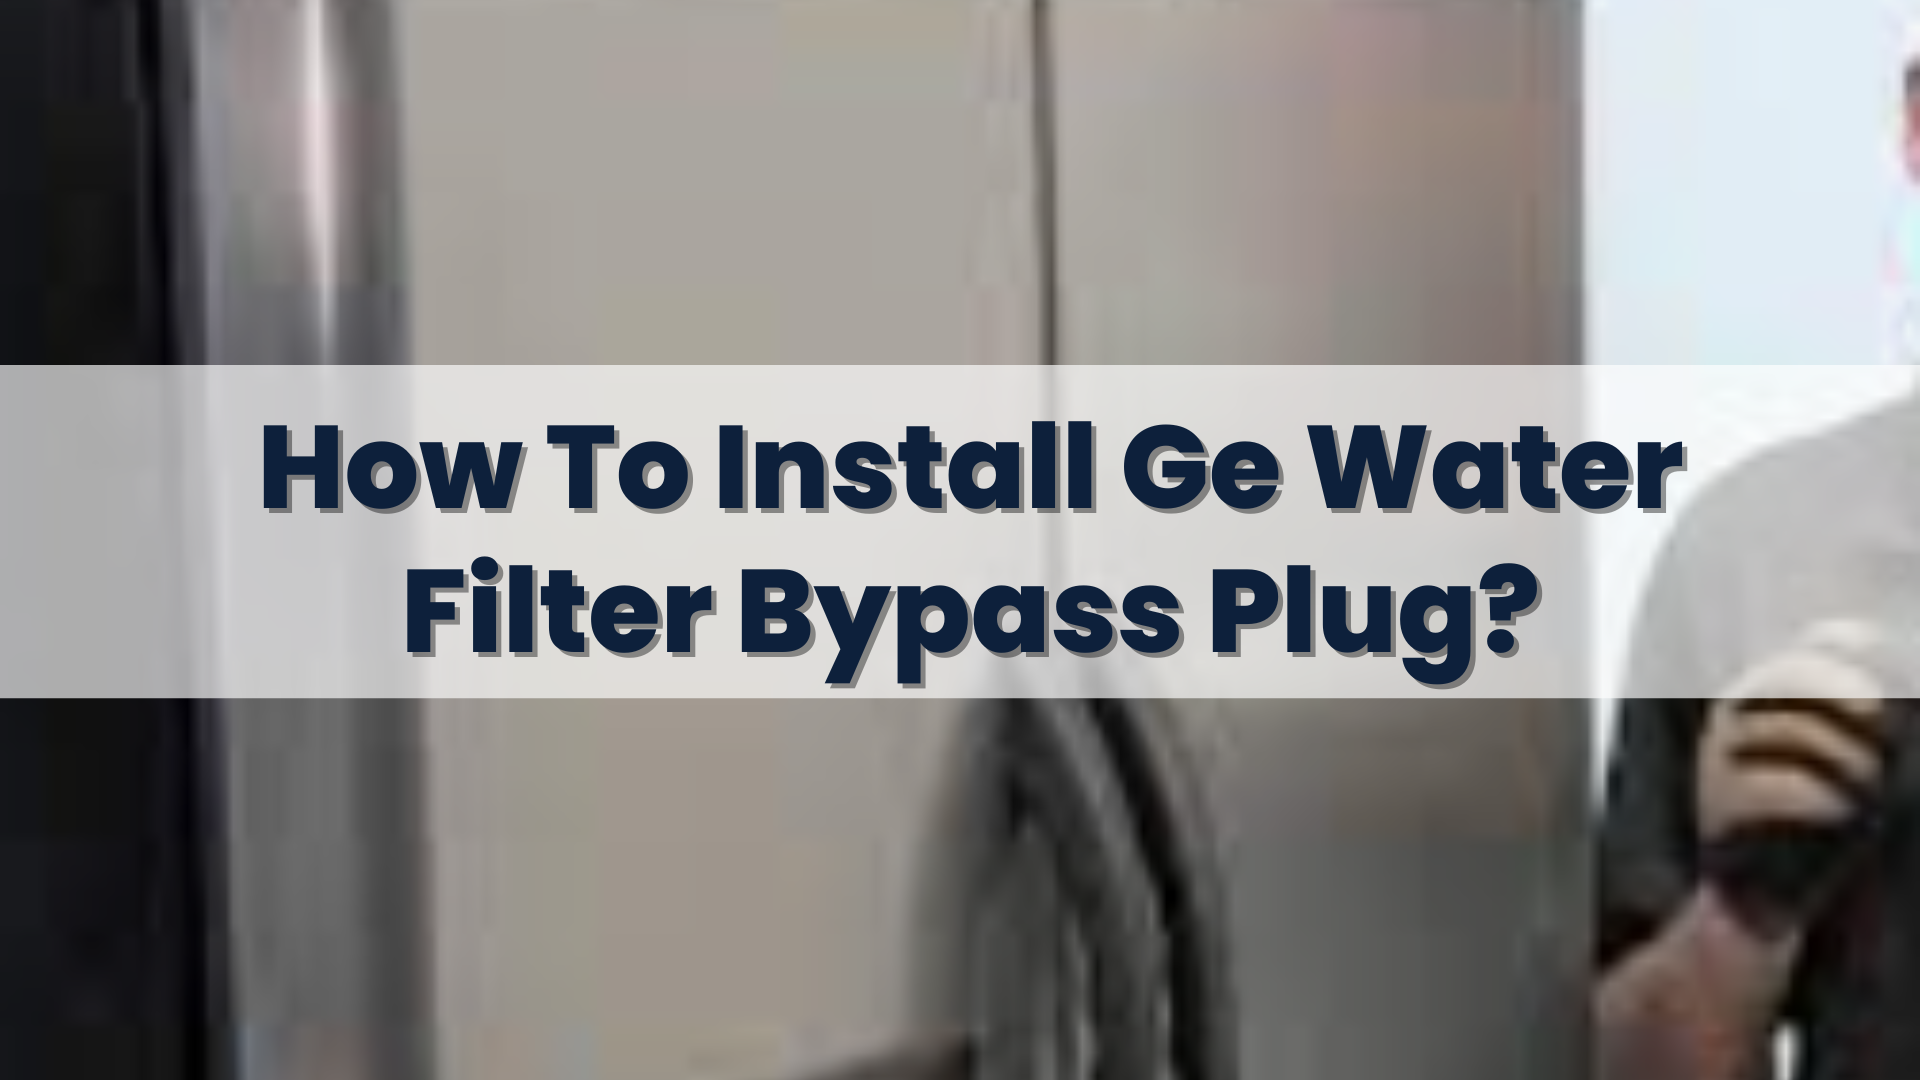 How To Install Ge Water Filter Bypass Plug